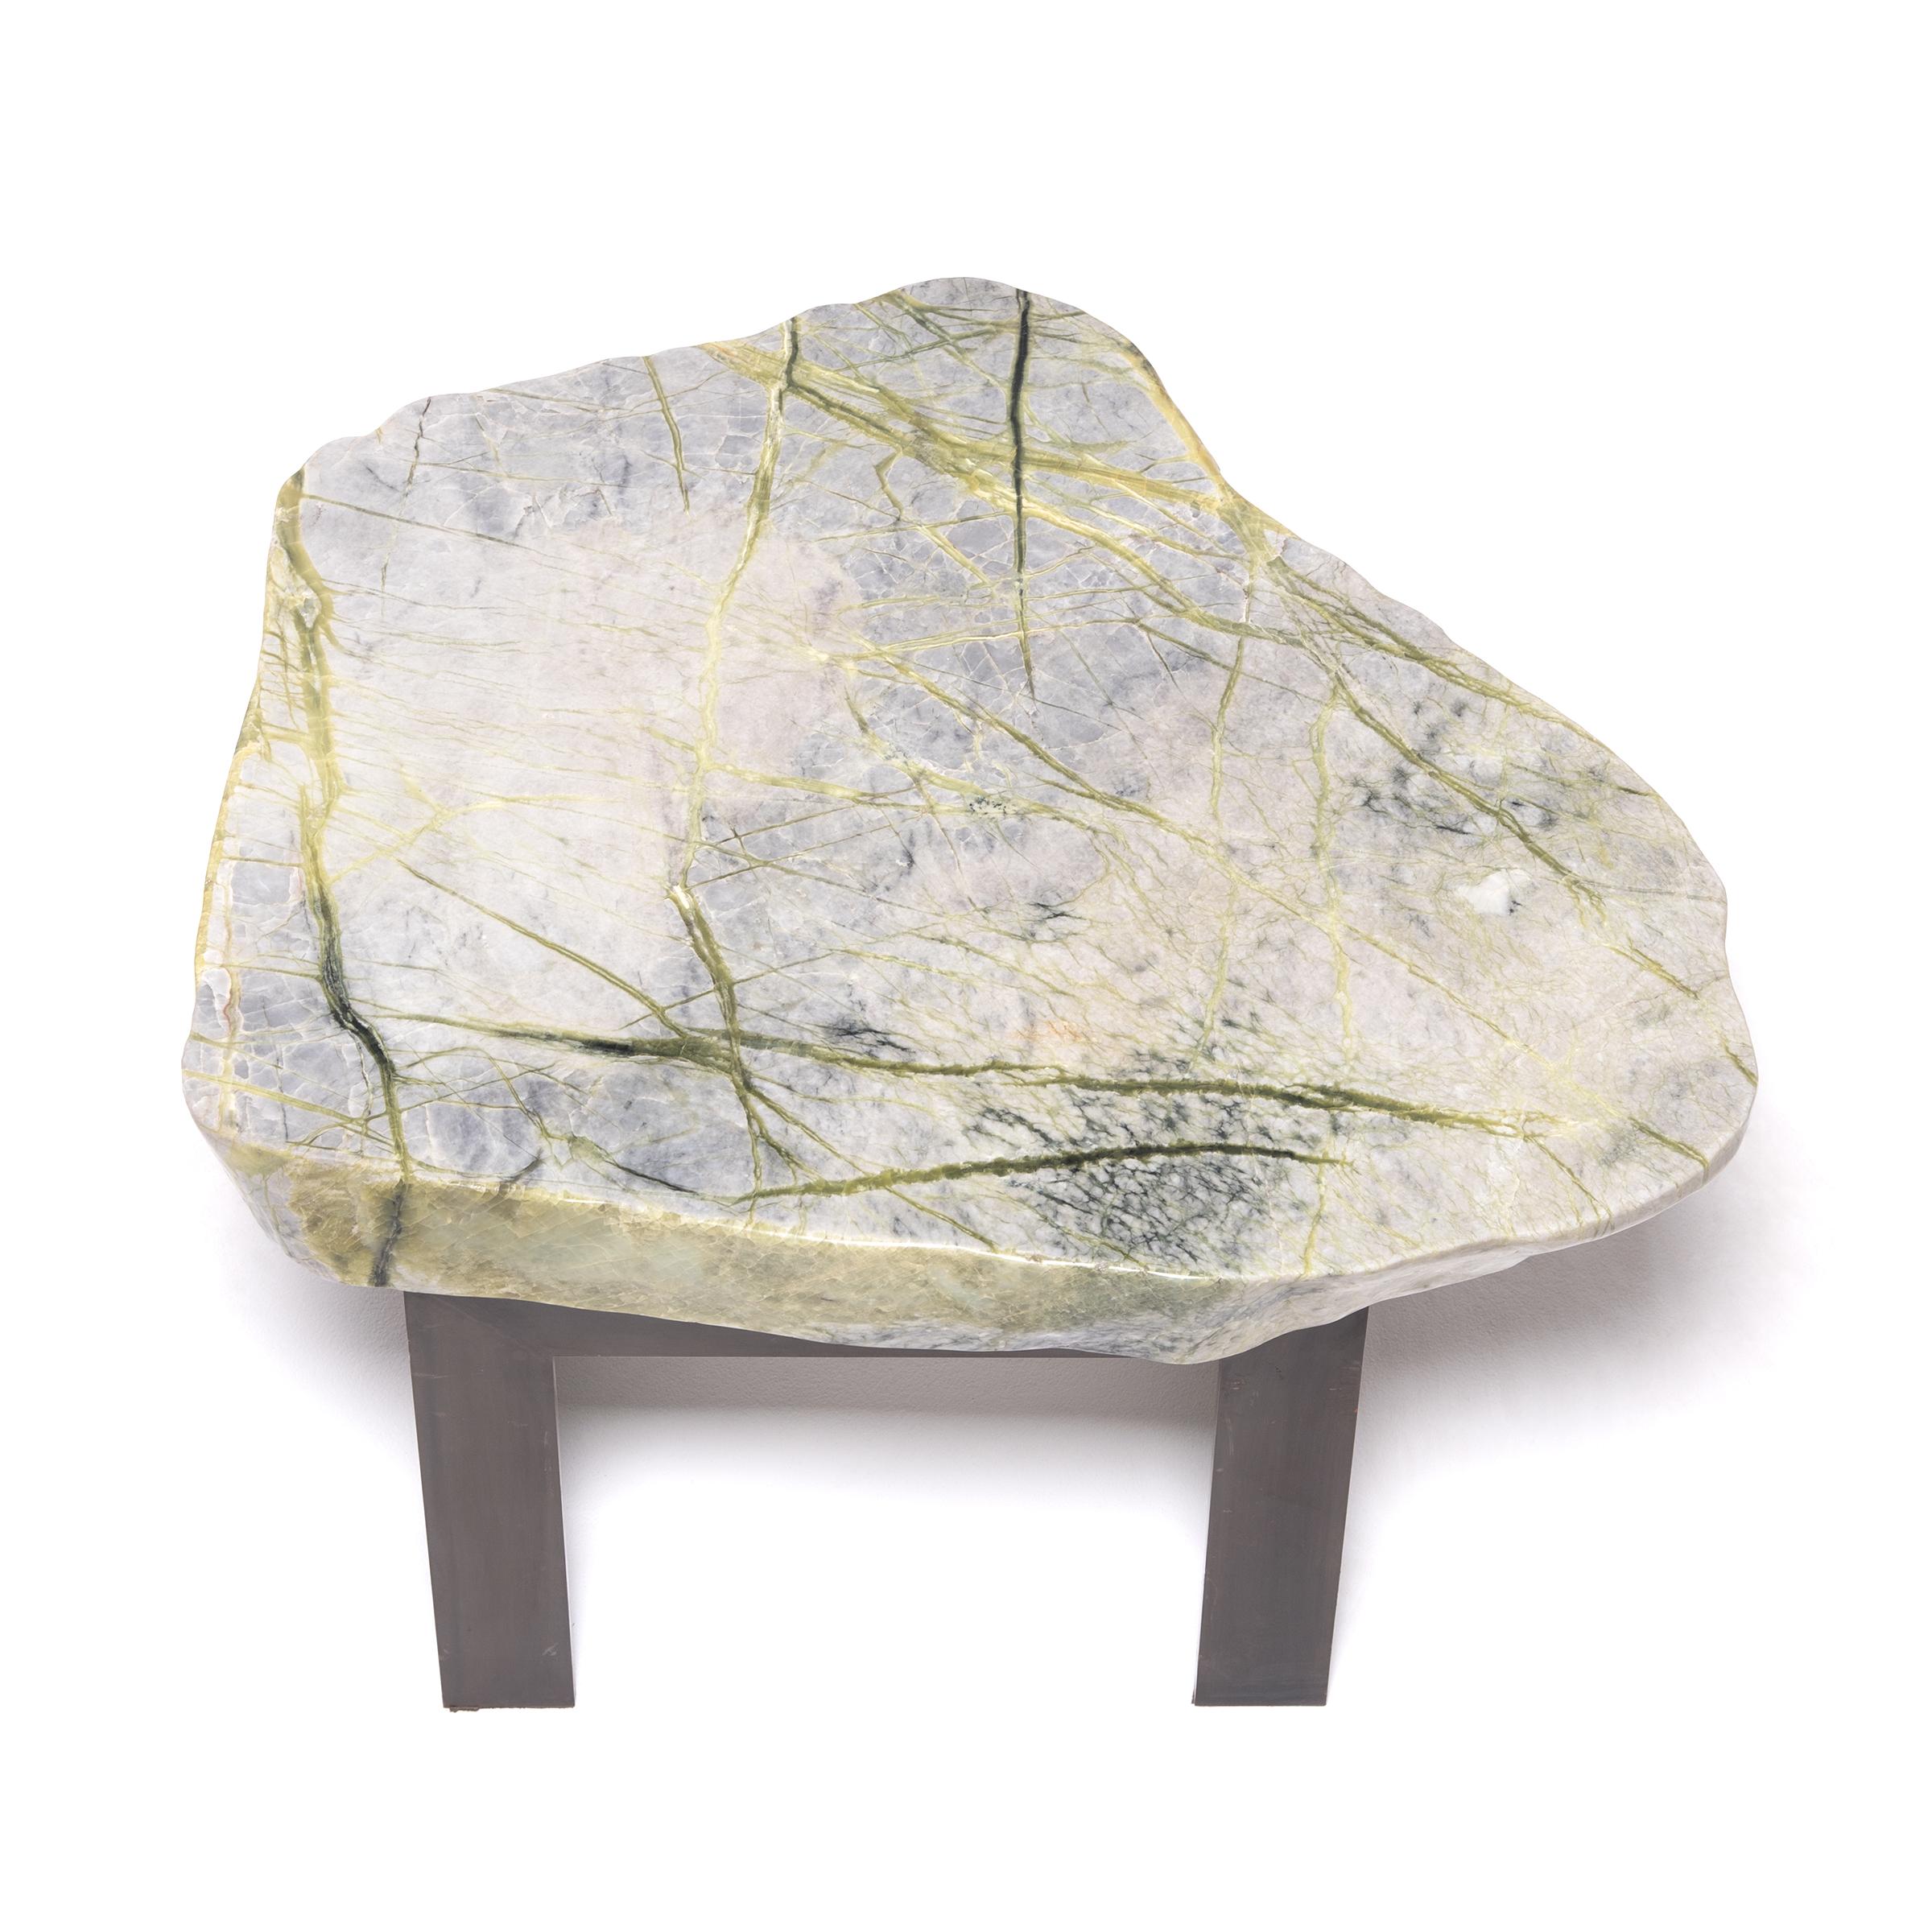 Prized by ancient scholars, meditation stones provided inspiration for poetry, painted landscapes, or brushed calligraphy. Supported by a custom Parson's-style steel base, the greenery stone that tops this table is composed of jadeite, moss agate,